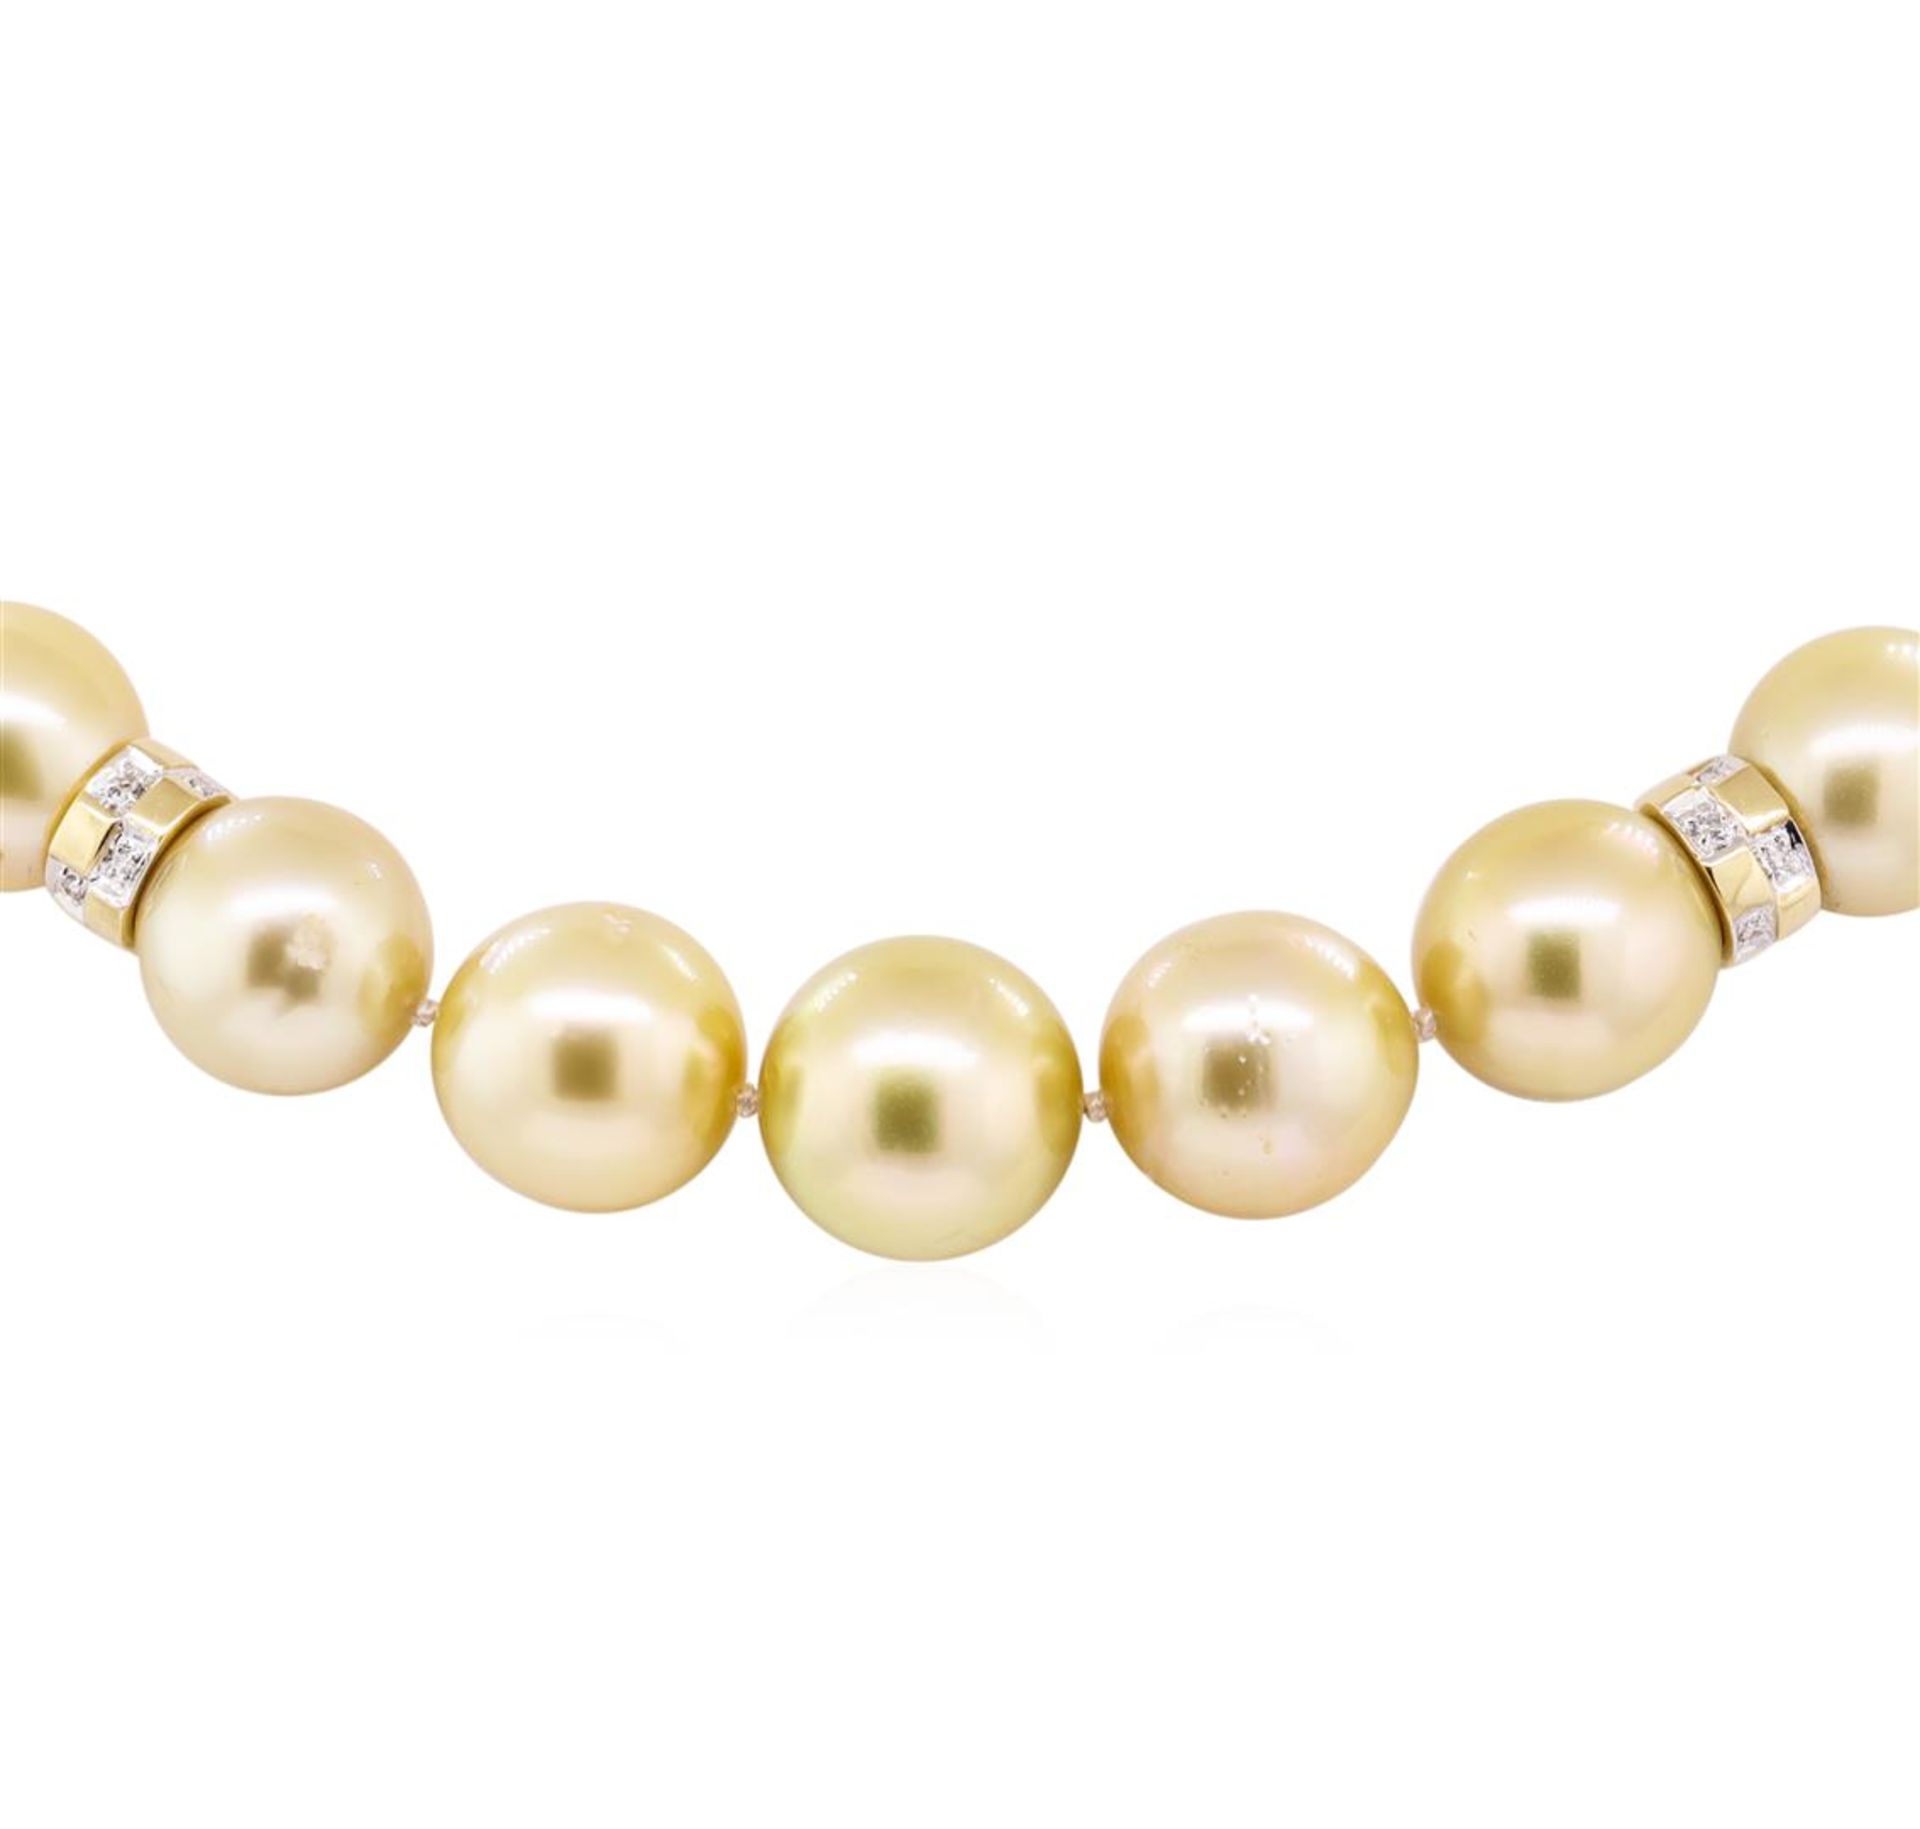 0.80 ctw Diamond and South Sea Pearl Necklace - 14KT Yellow Gold - Image 2 of 4